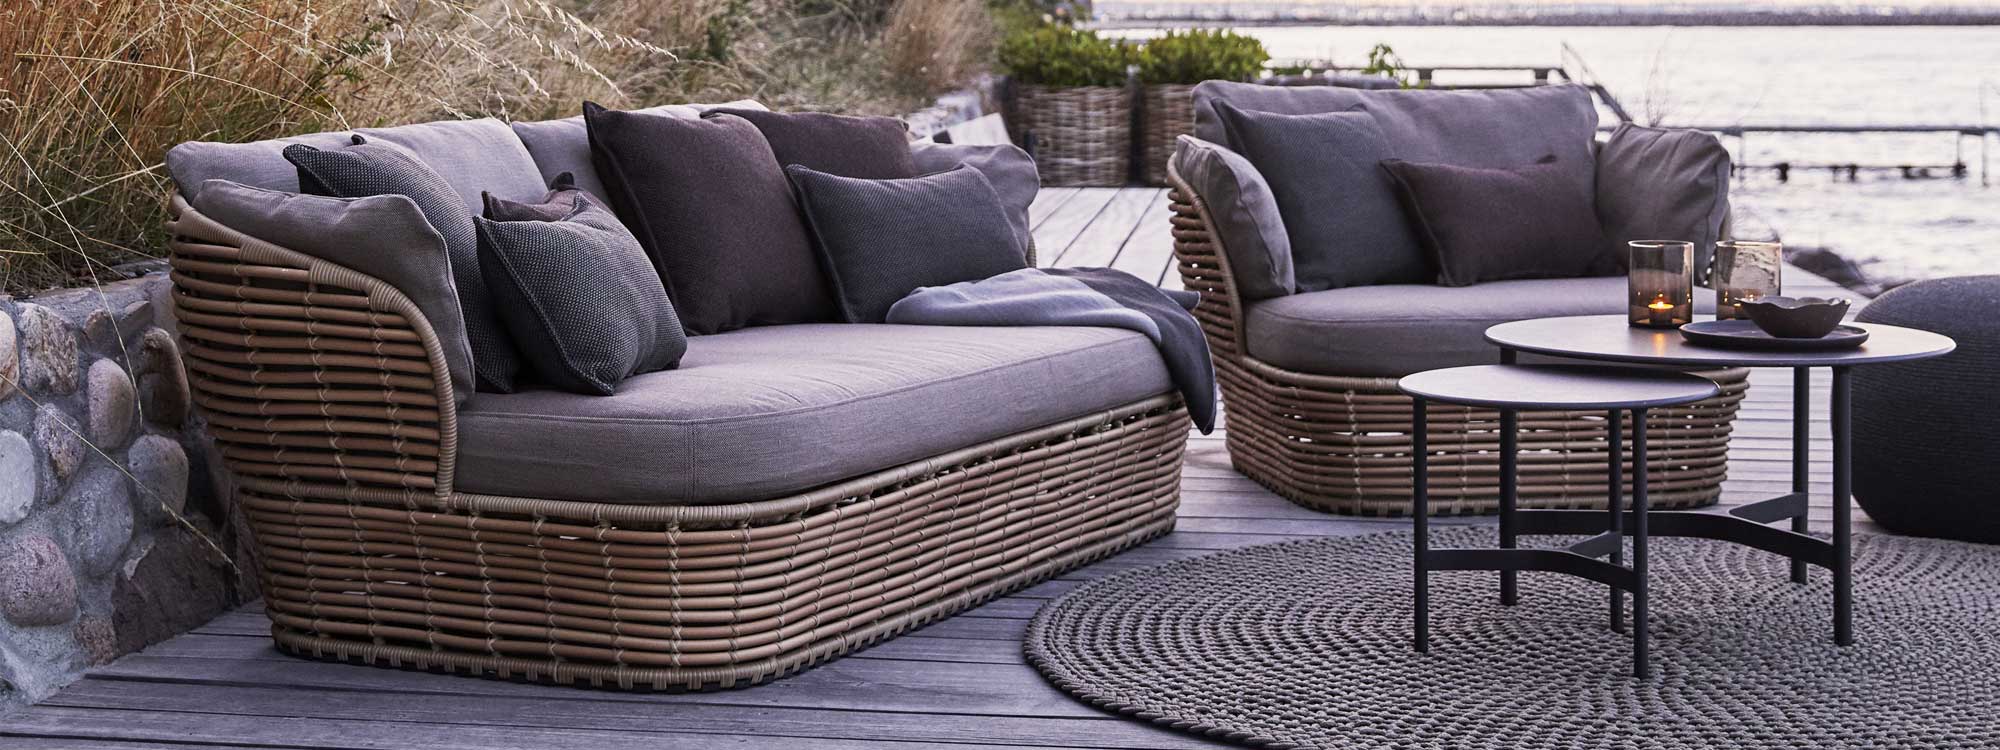 Image of Caneline Basket natural cane-effect garden sofa and lounge chair with taupe cushions, with Twist round low tables in the middle